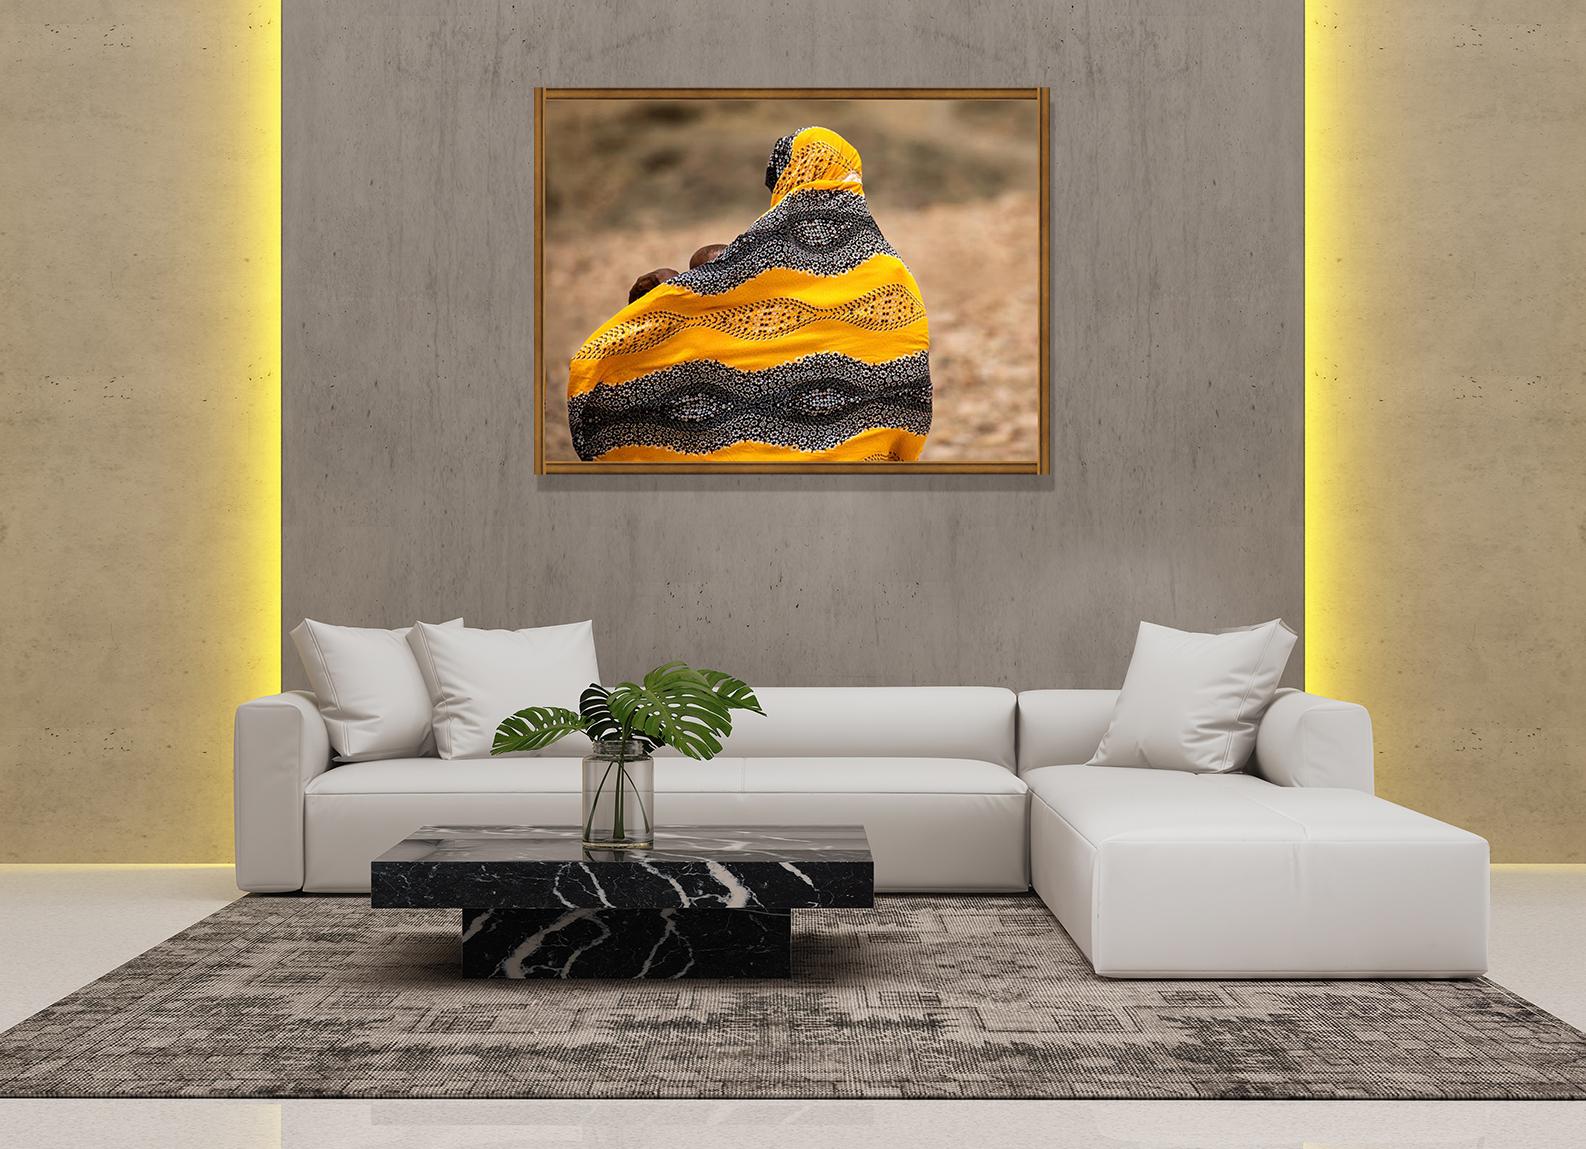 This fine art print features back of a woman wearing Yellow-Gray scarf, holding two of her babies. This image was shot by Dorte Verner in Djibouti, East Africa, one of the warmest and driest cities in the world. 

Dorte Verner shot this photograph,